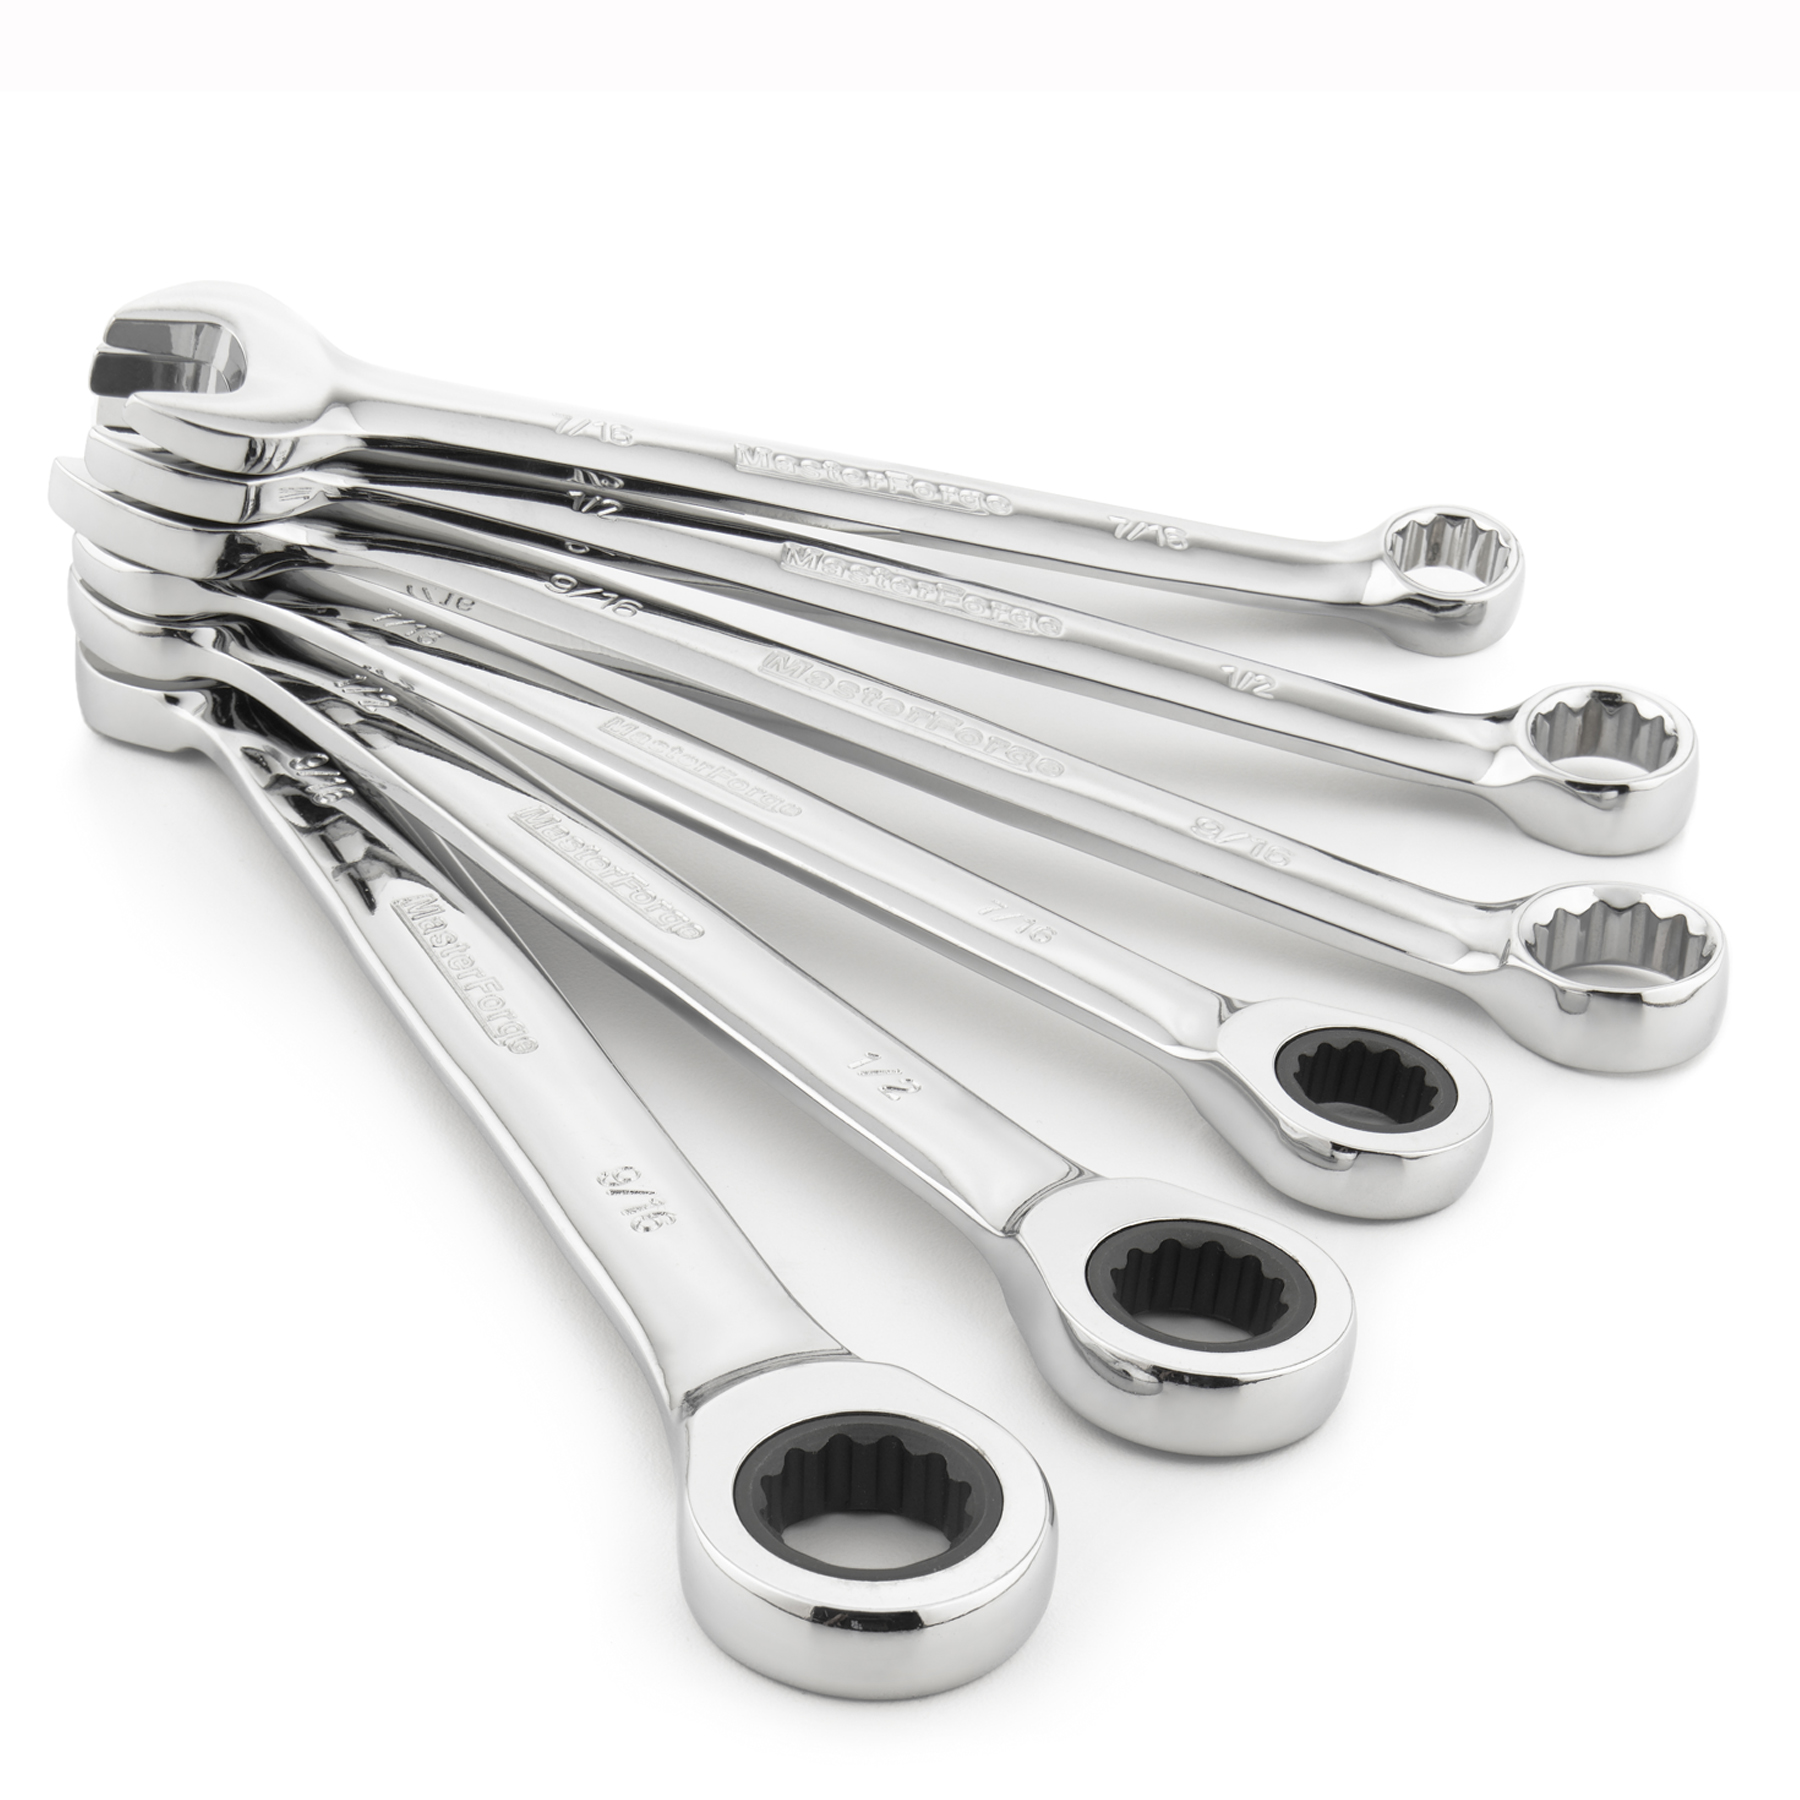 Master Forge 6PC Combination Wrench Set—$9.99! (Was $39.99)